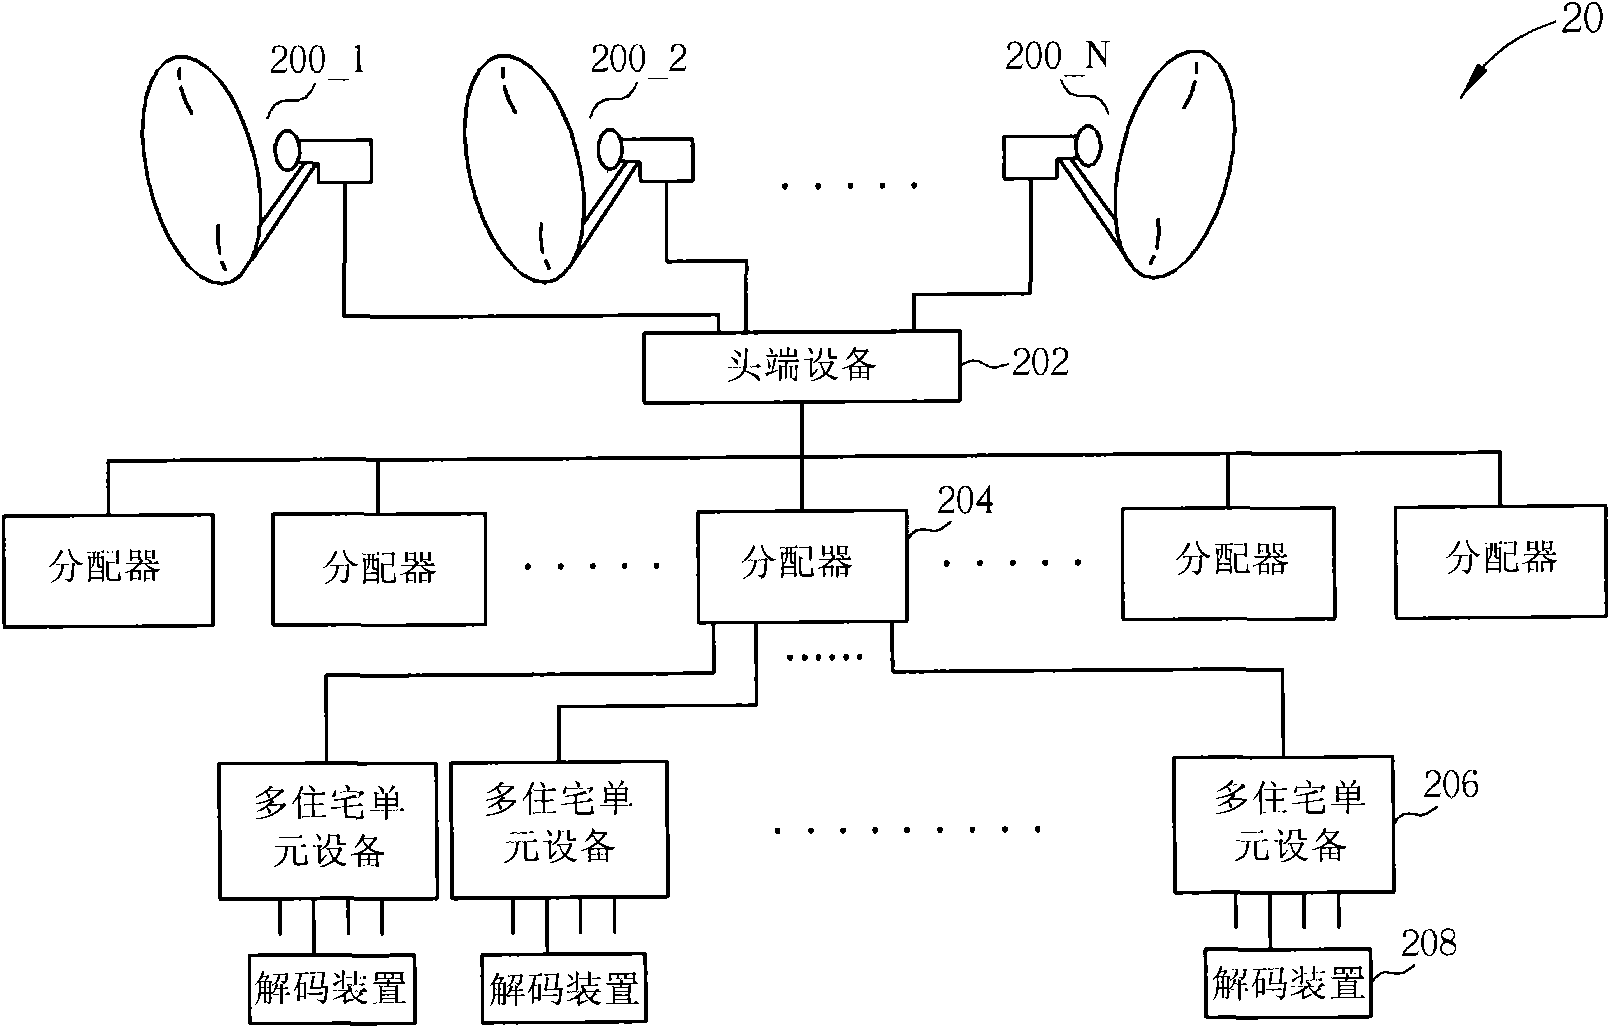 Optical low-noise block downconverter, multi-dwelling unit equipment and related satellite television system